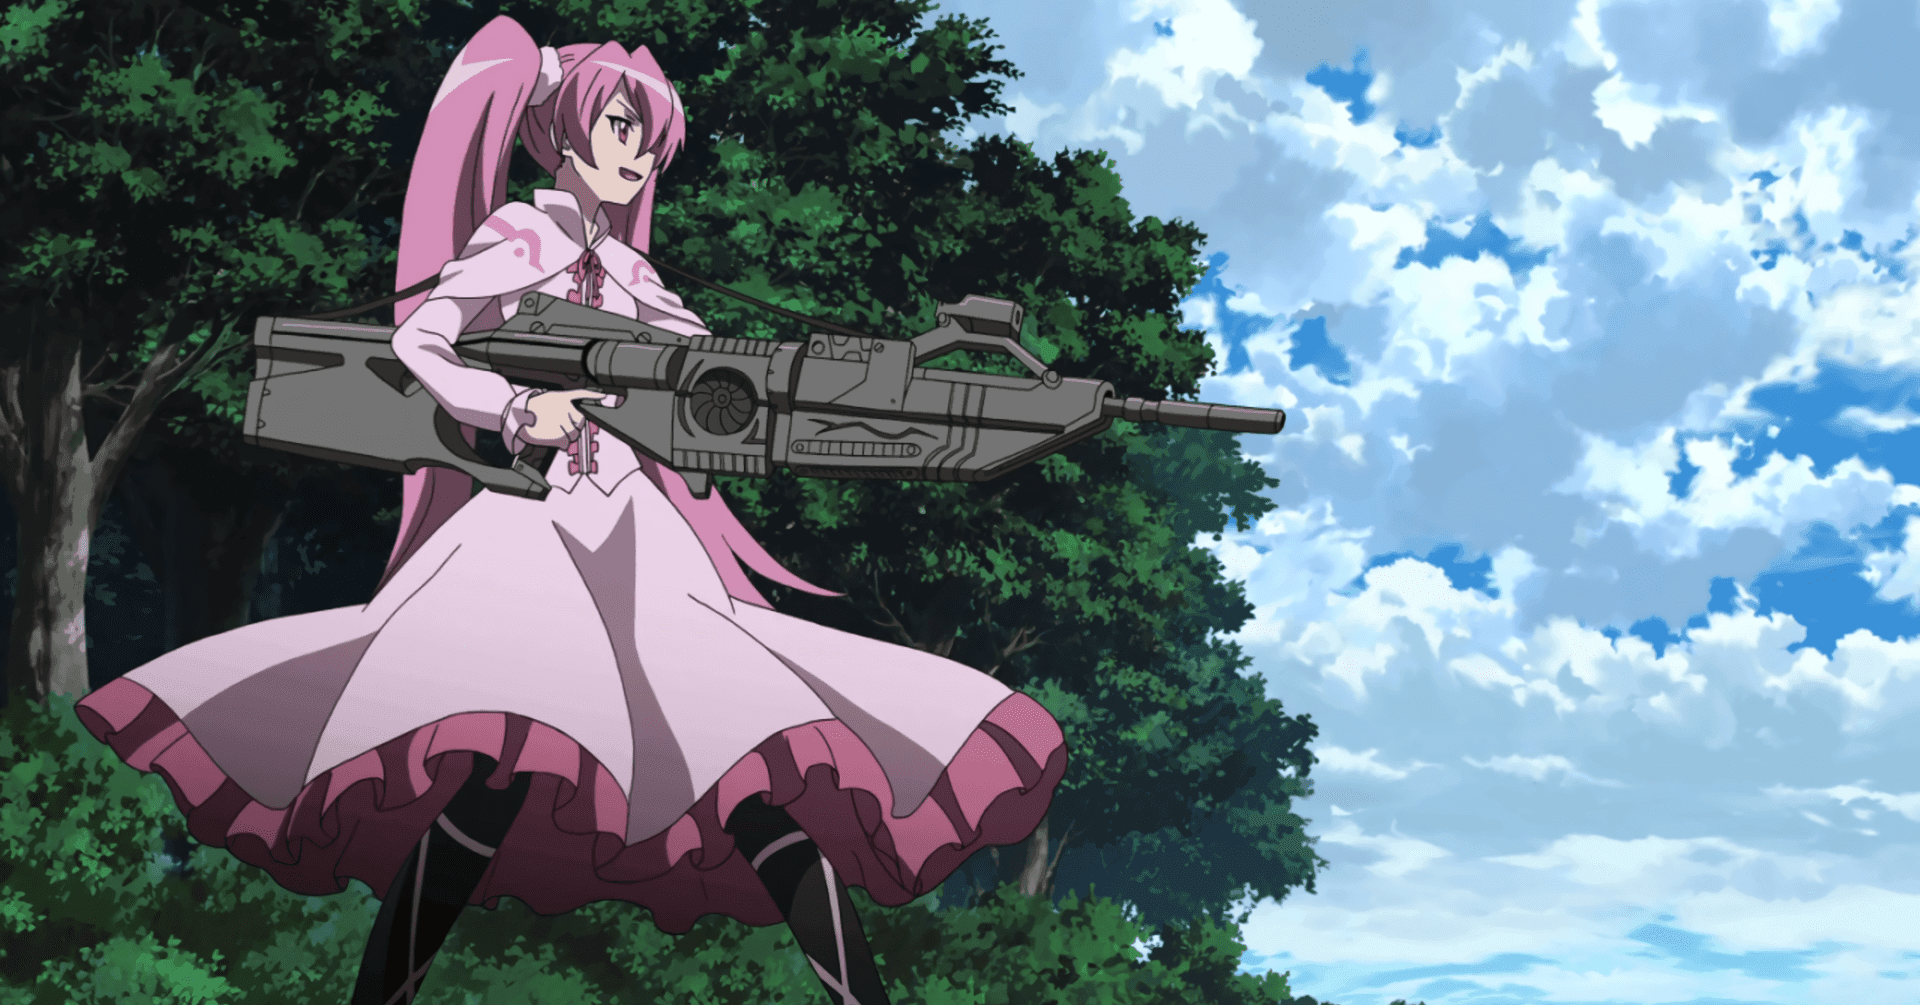 Still the best sniping scene out there [HighSchool of the Dead